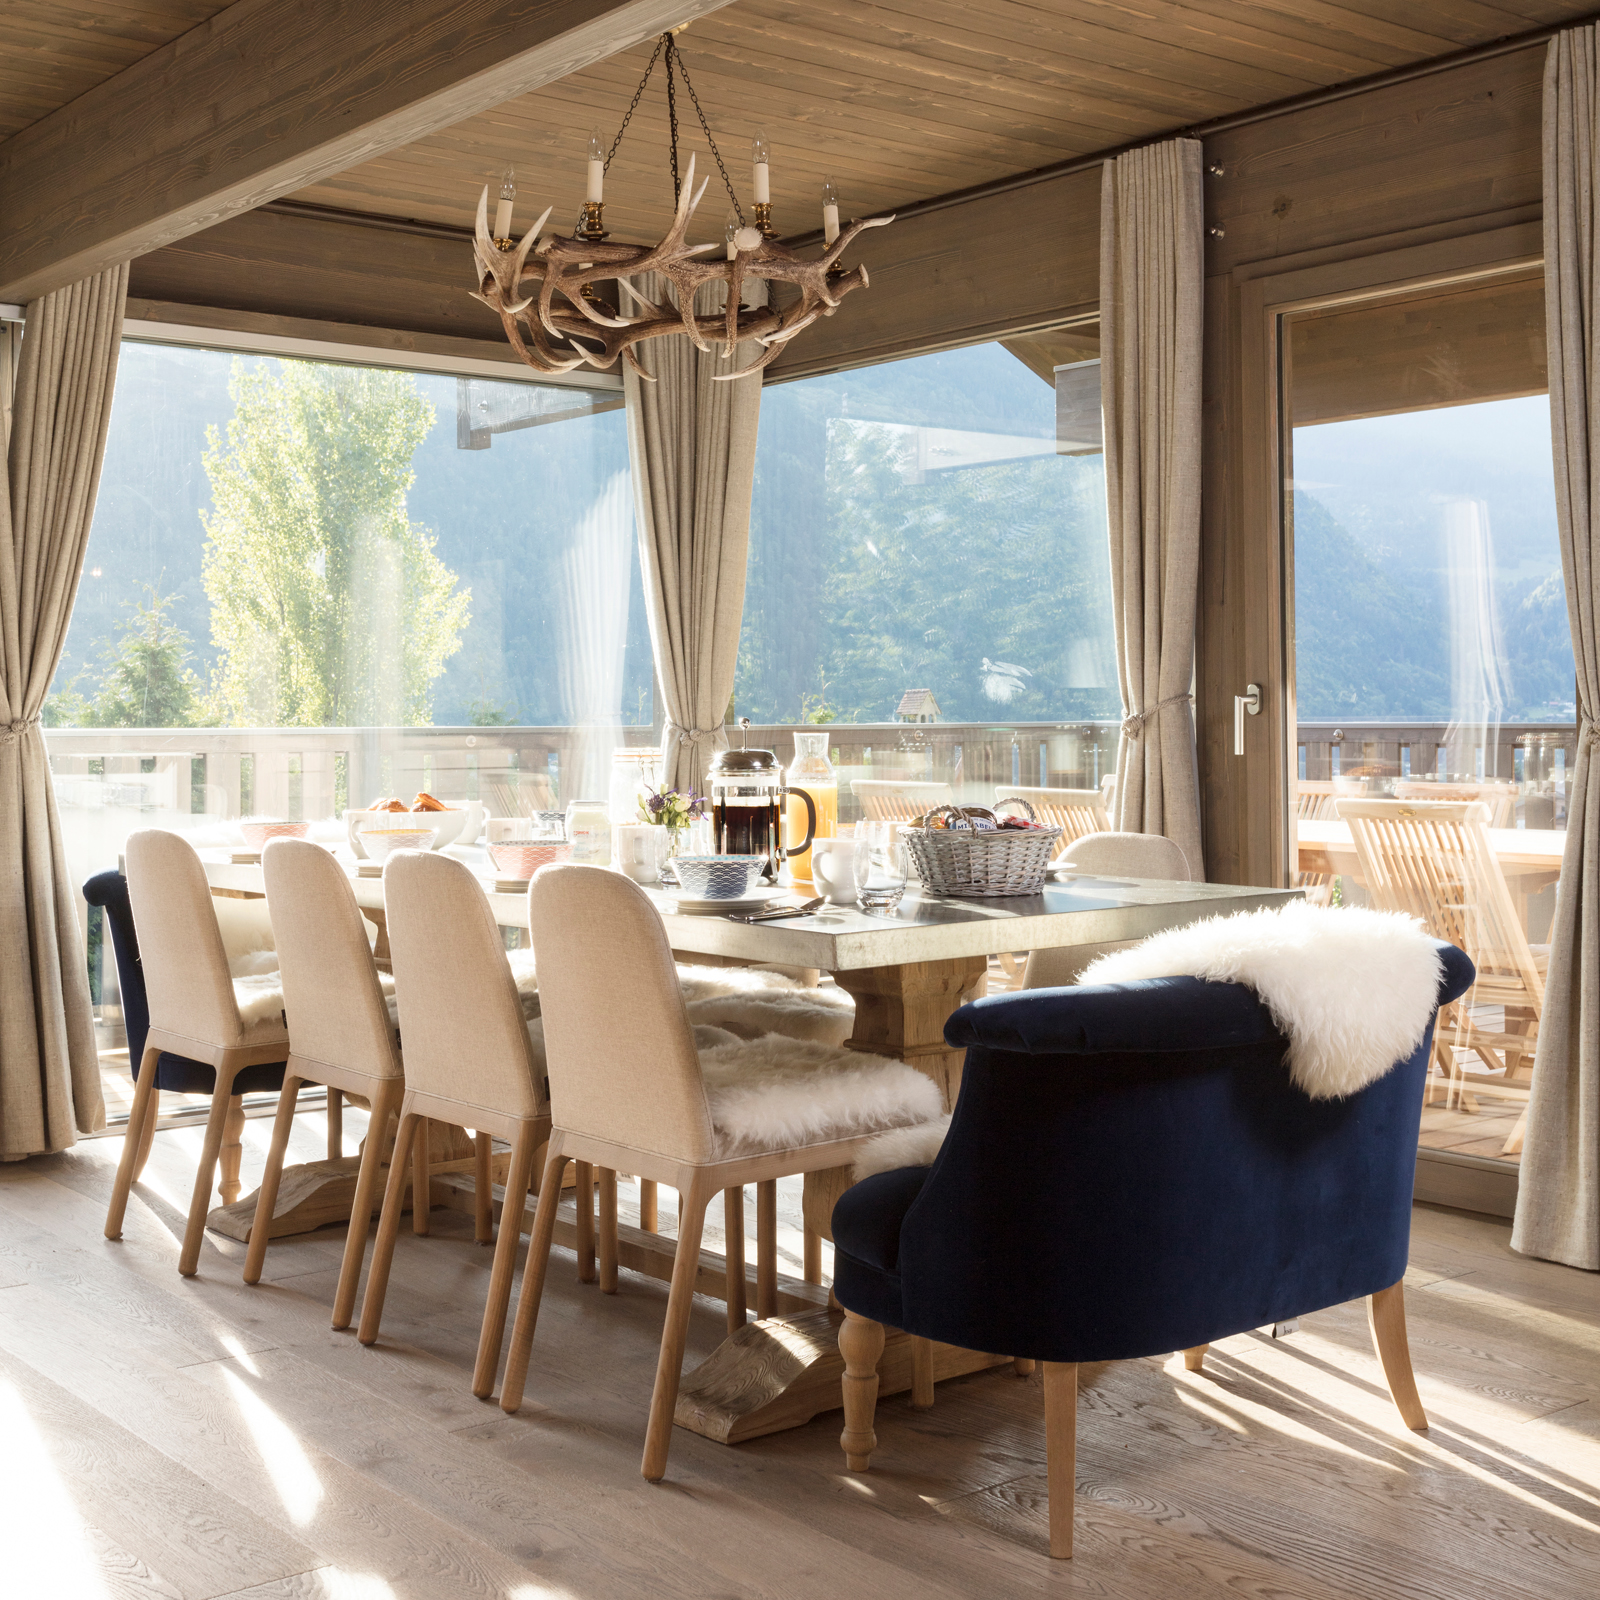 This photo of Chalet Mirabelle’s dining space with beautiful views was taken in the summer - our view was rather more snowy